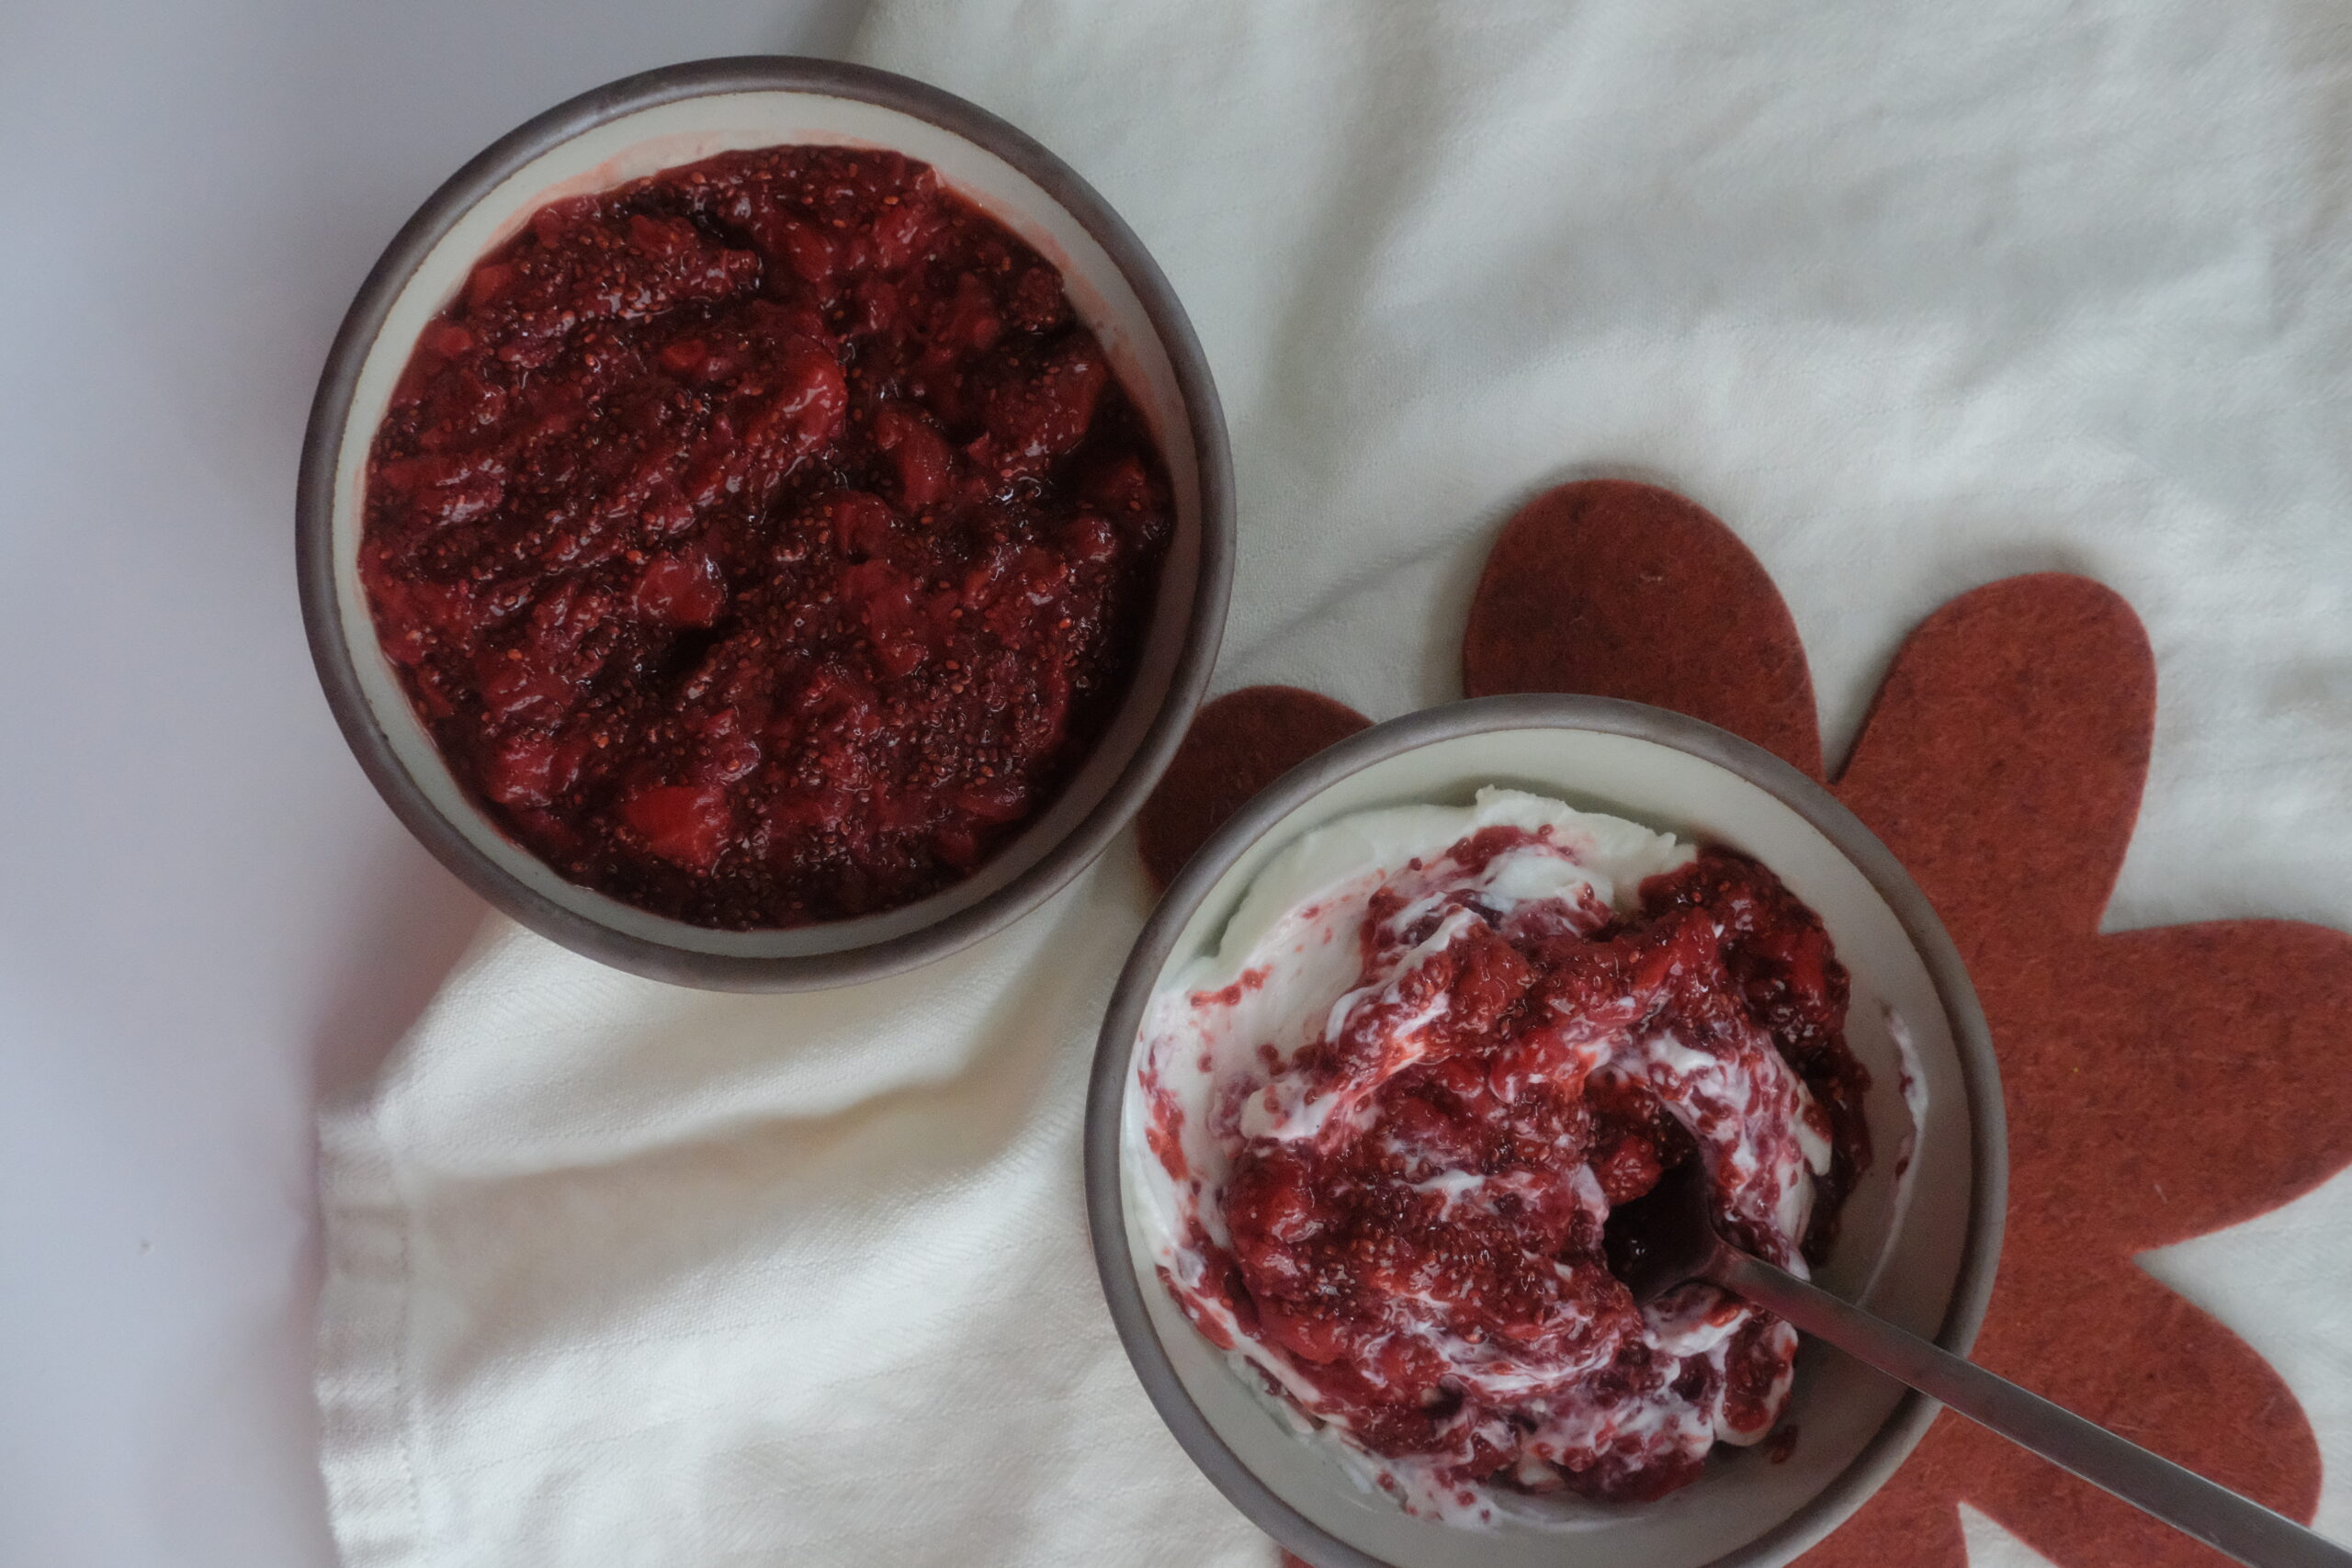 Enjoy this jam atop warm biscuits, yogurt, sandwiches or anything your heart desires.